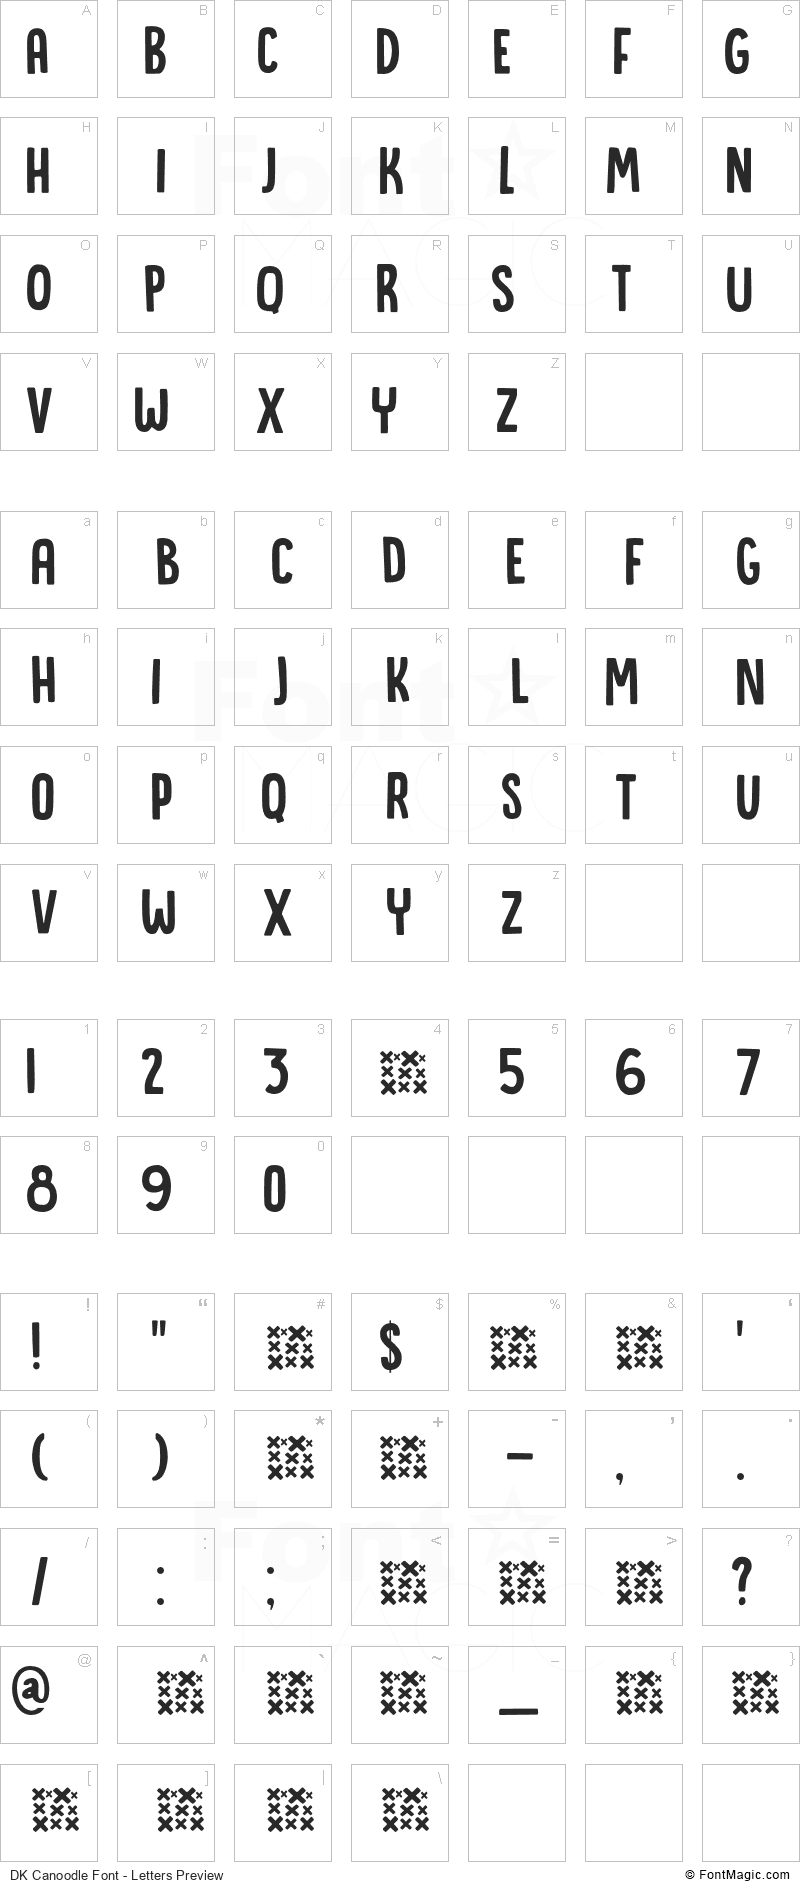 DK Canoodle Font - All Latters Preview Chart